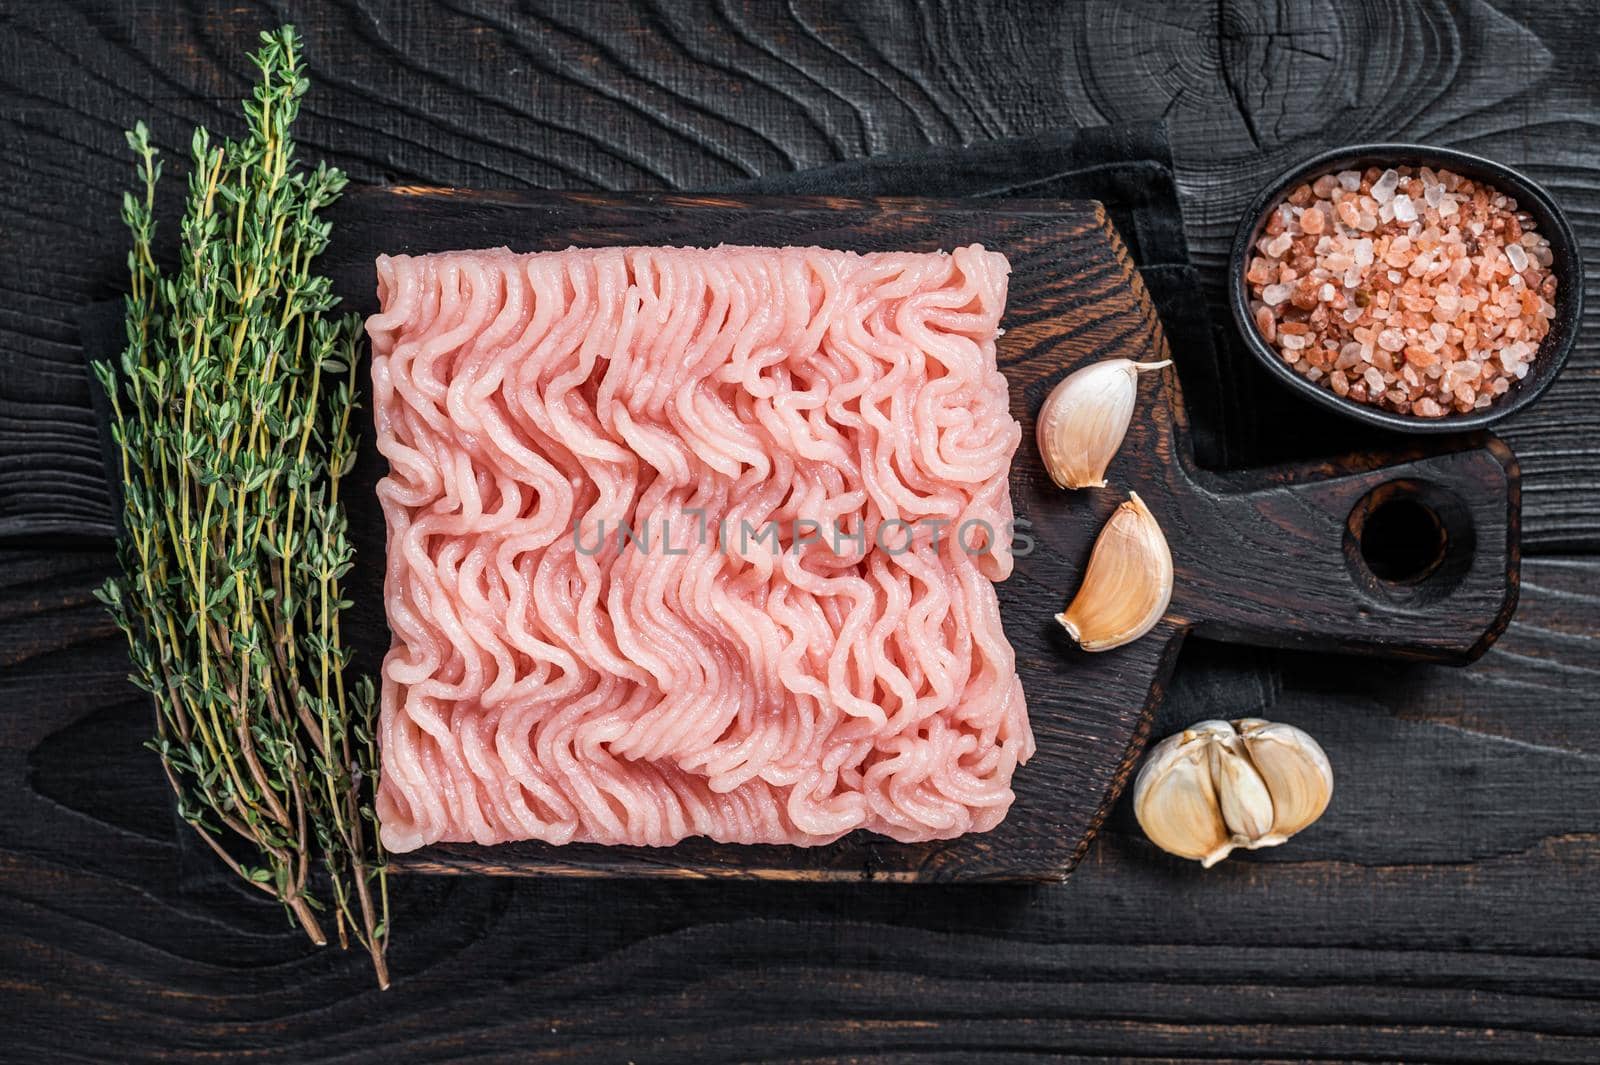 Fresh Raw mince or ground chicken meat on wooden chopping board with thyme. Black wooden background. Top view.